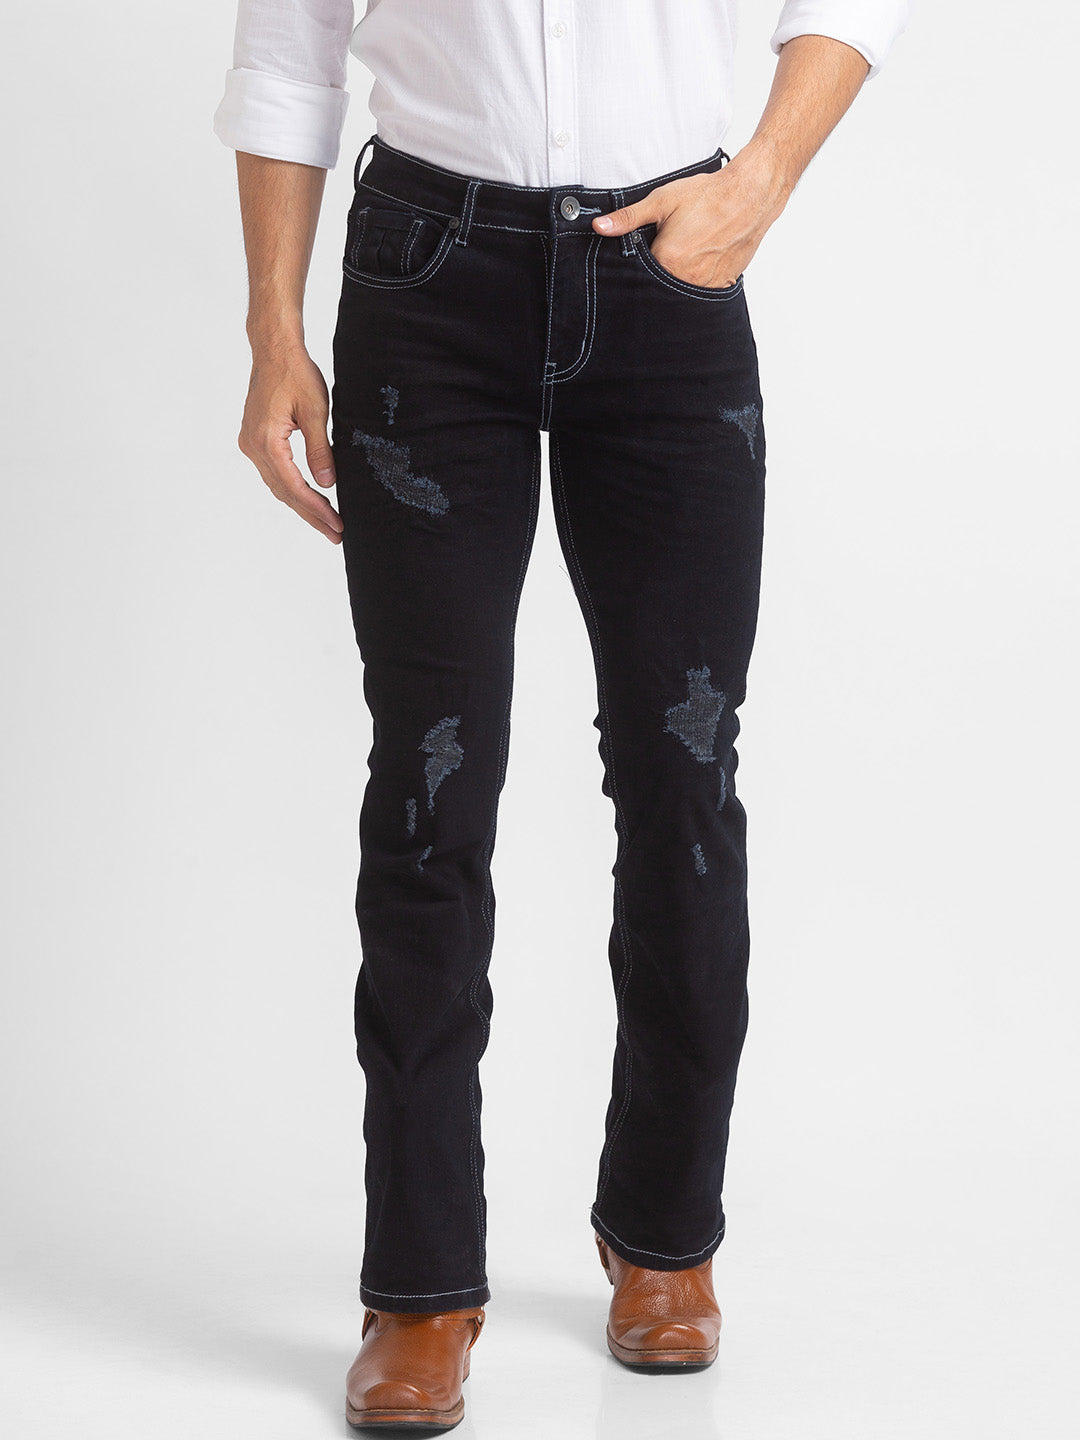 Details more than 228 black distressed jeans latest